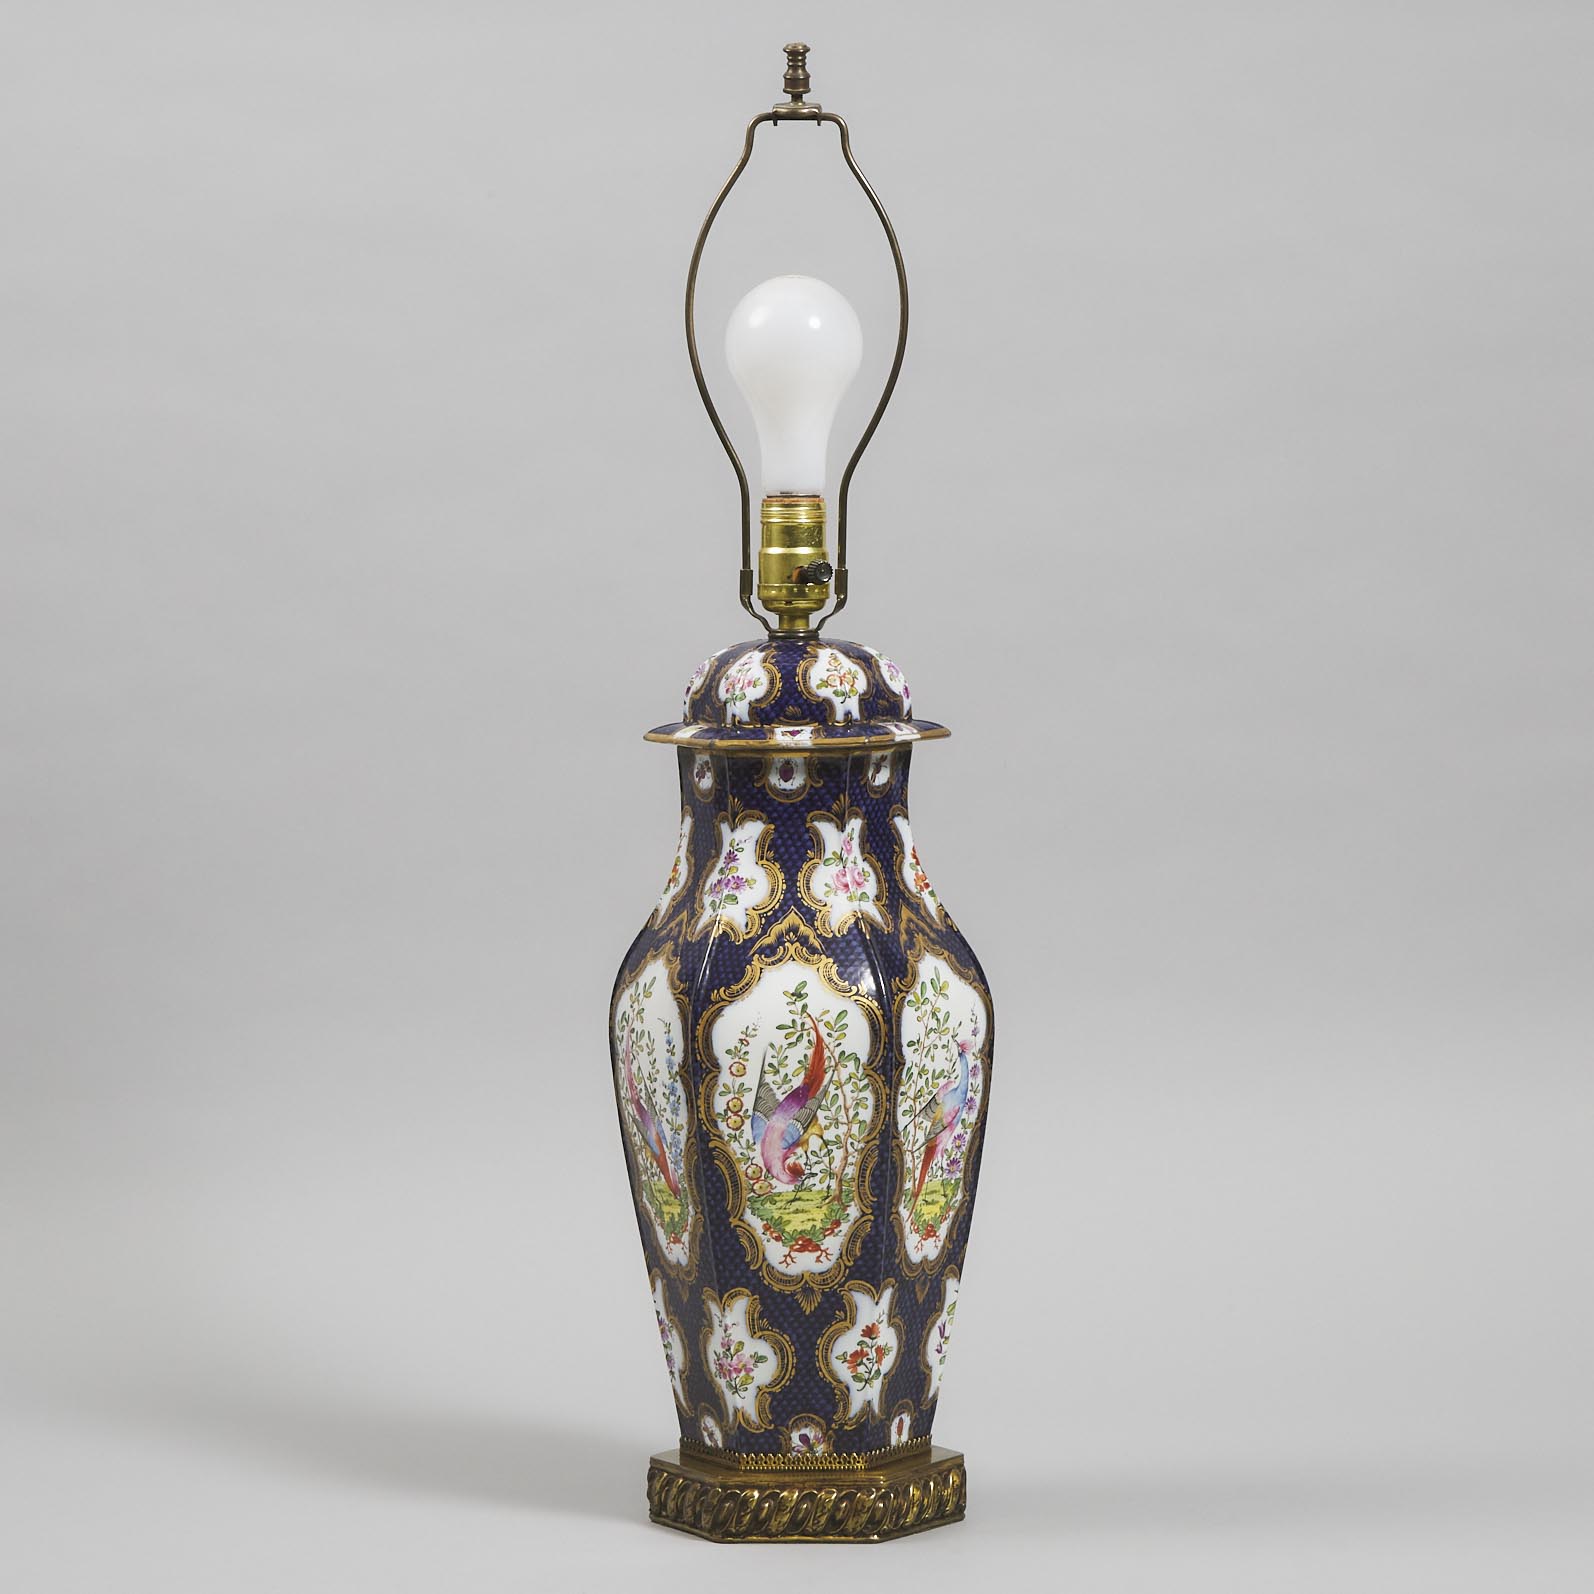 Samson 'Worcester' Scale Blue Ground Exotic Birds Hexagonal Covered Vase as a Table Lamp, c.1900